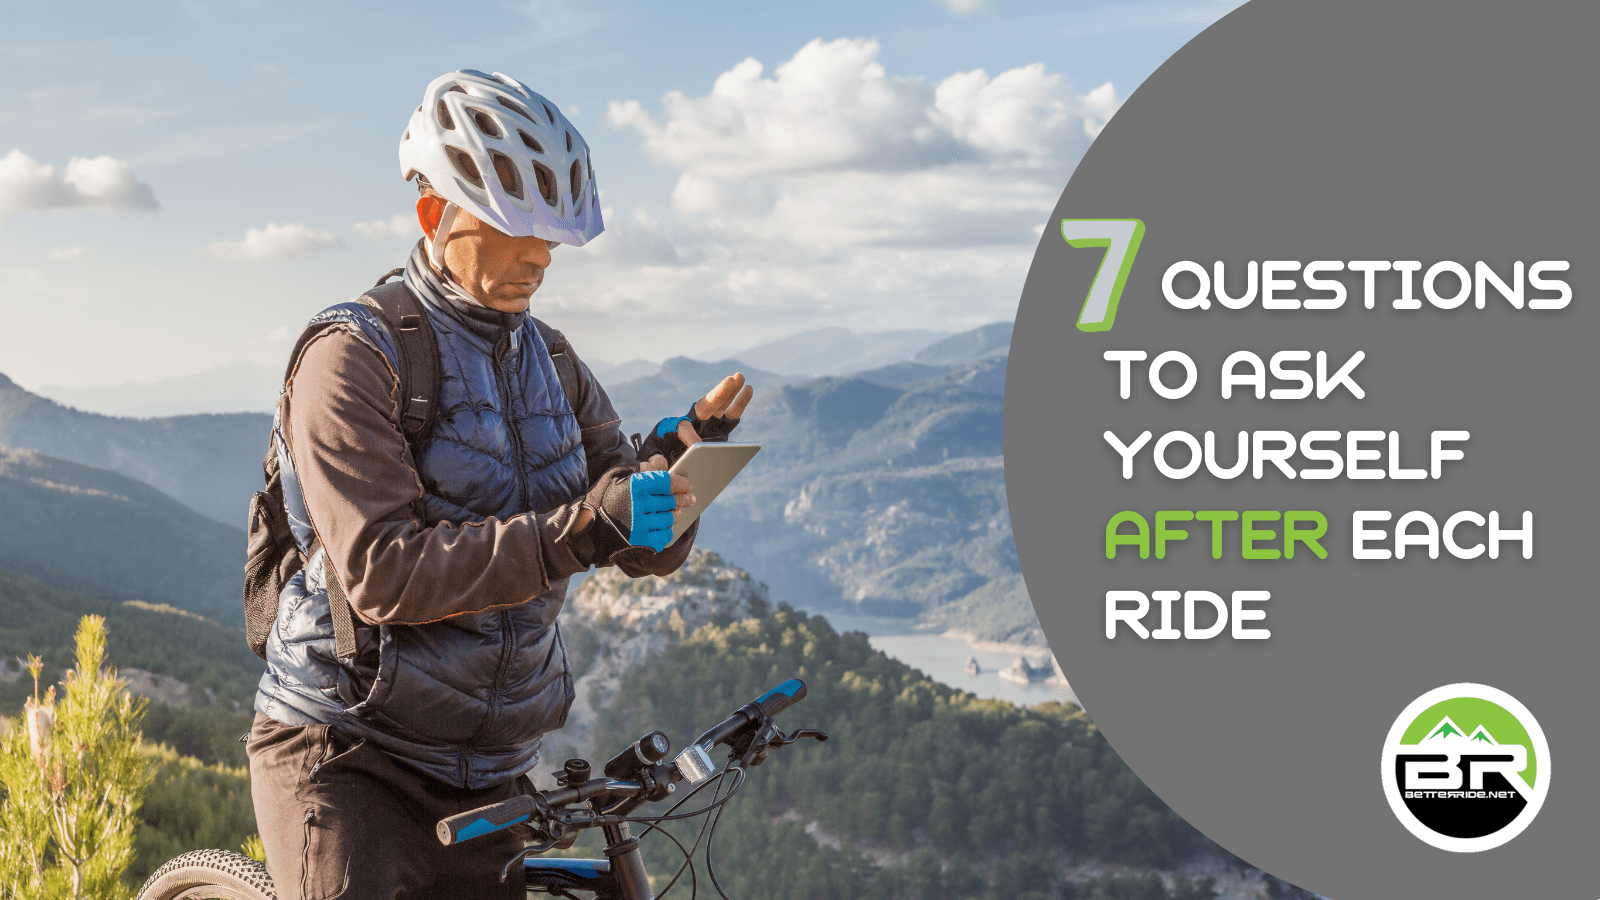 7 Questions to ask yourself after each ride